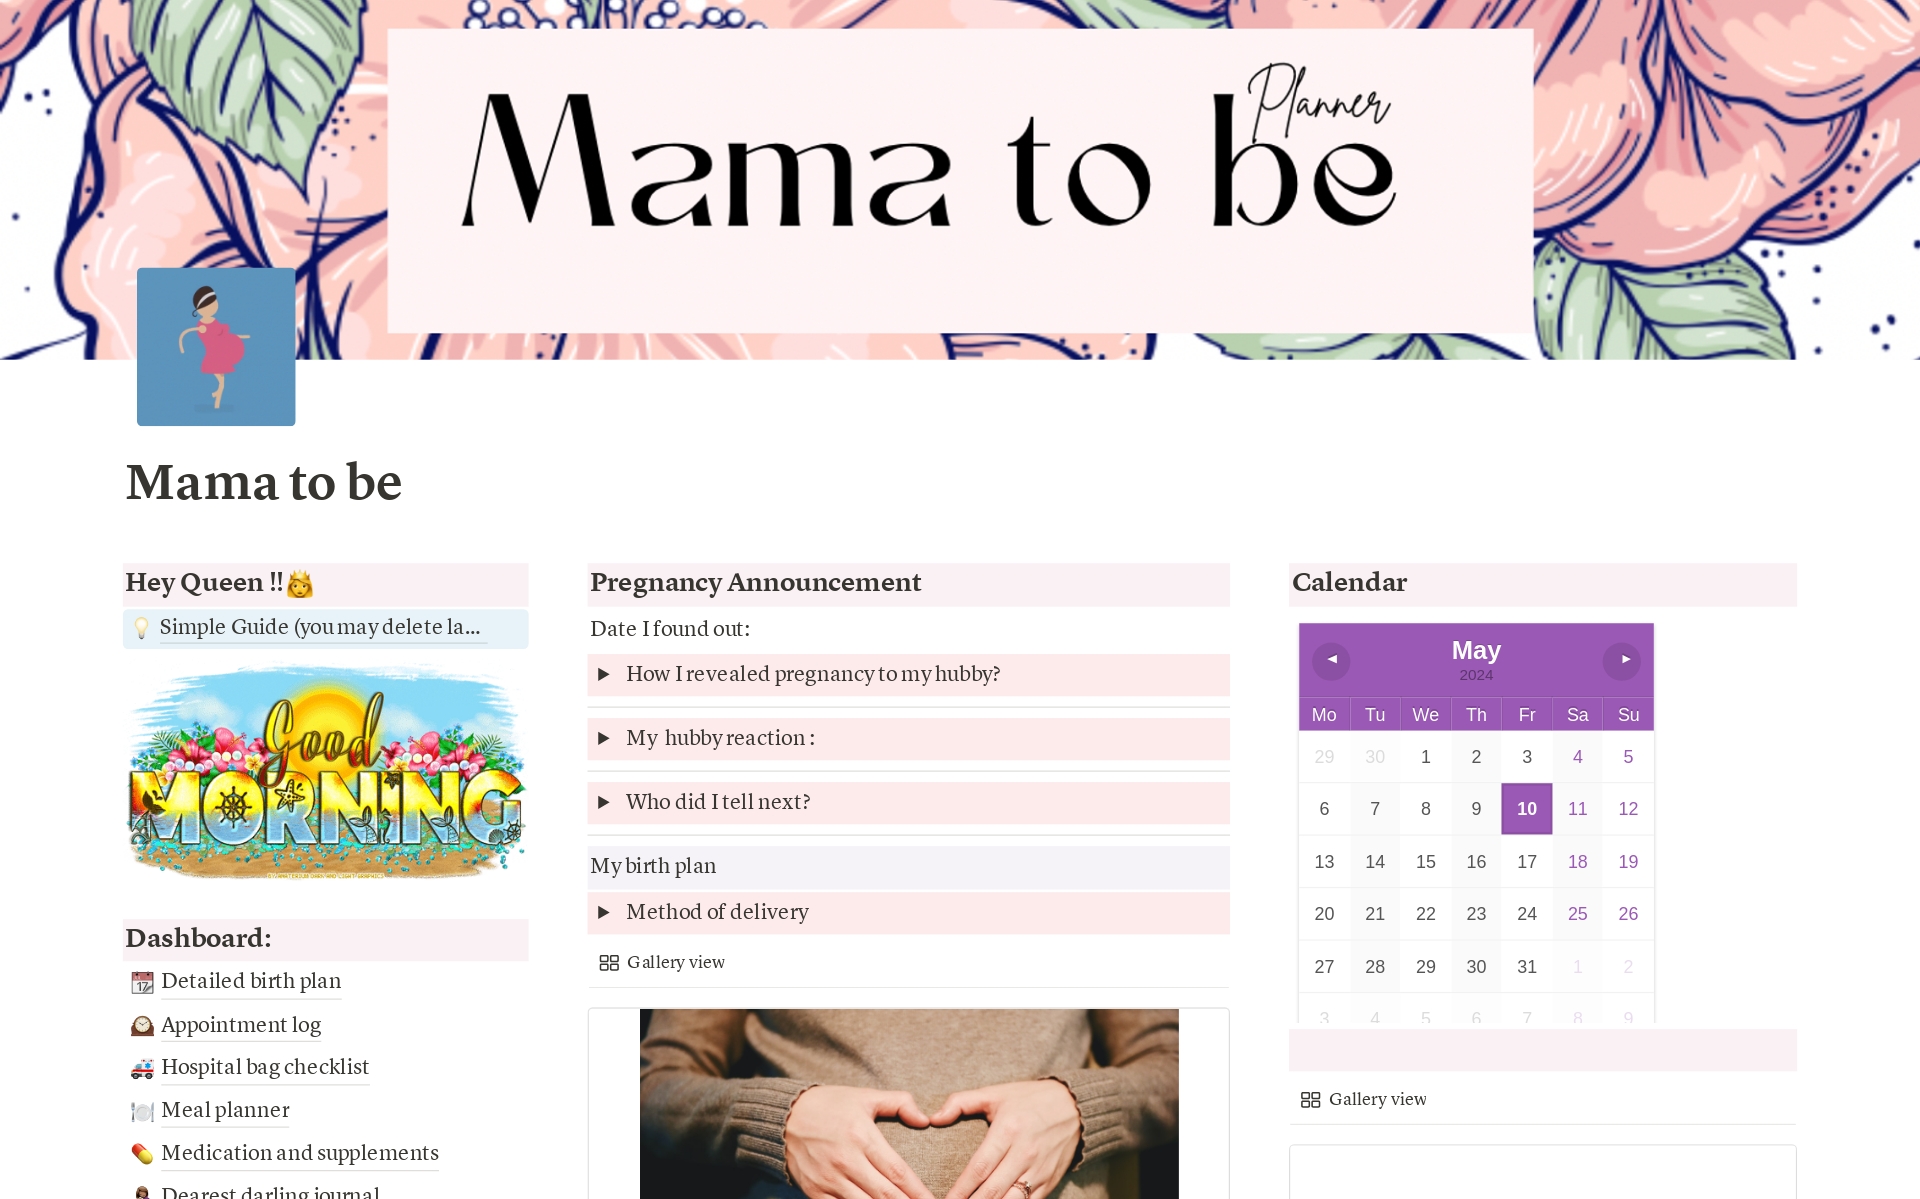 1 notion template divided into 3 sections (columns)

﻿﻿The left section includes mainly the dashboard and this the most important one, since it's the only way to navigate through pages.

﻿﻿Middle section contains the important events during finding out your pregnancy

﻿﻿